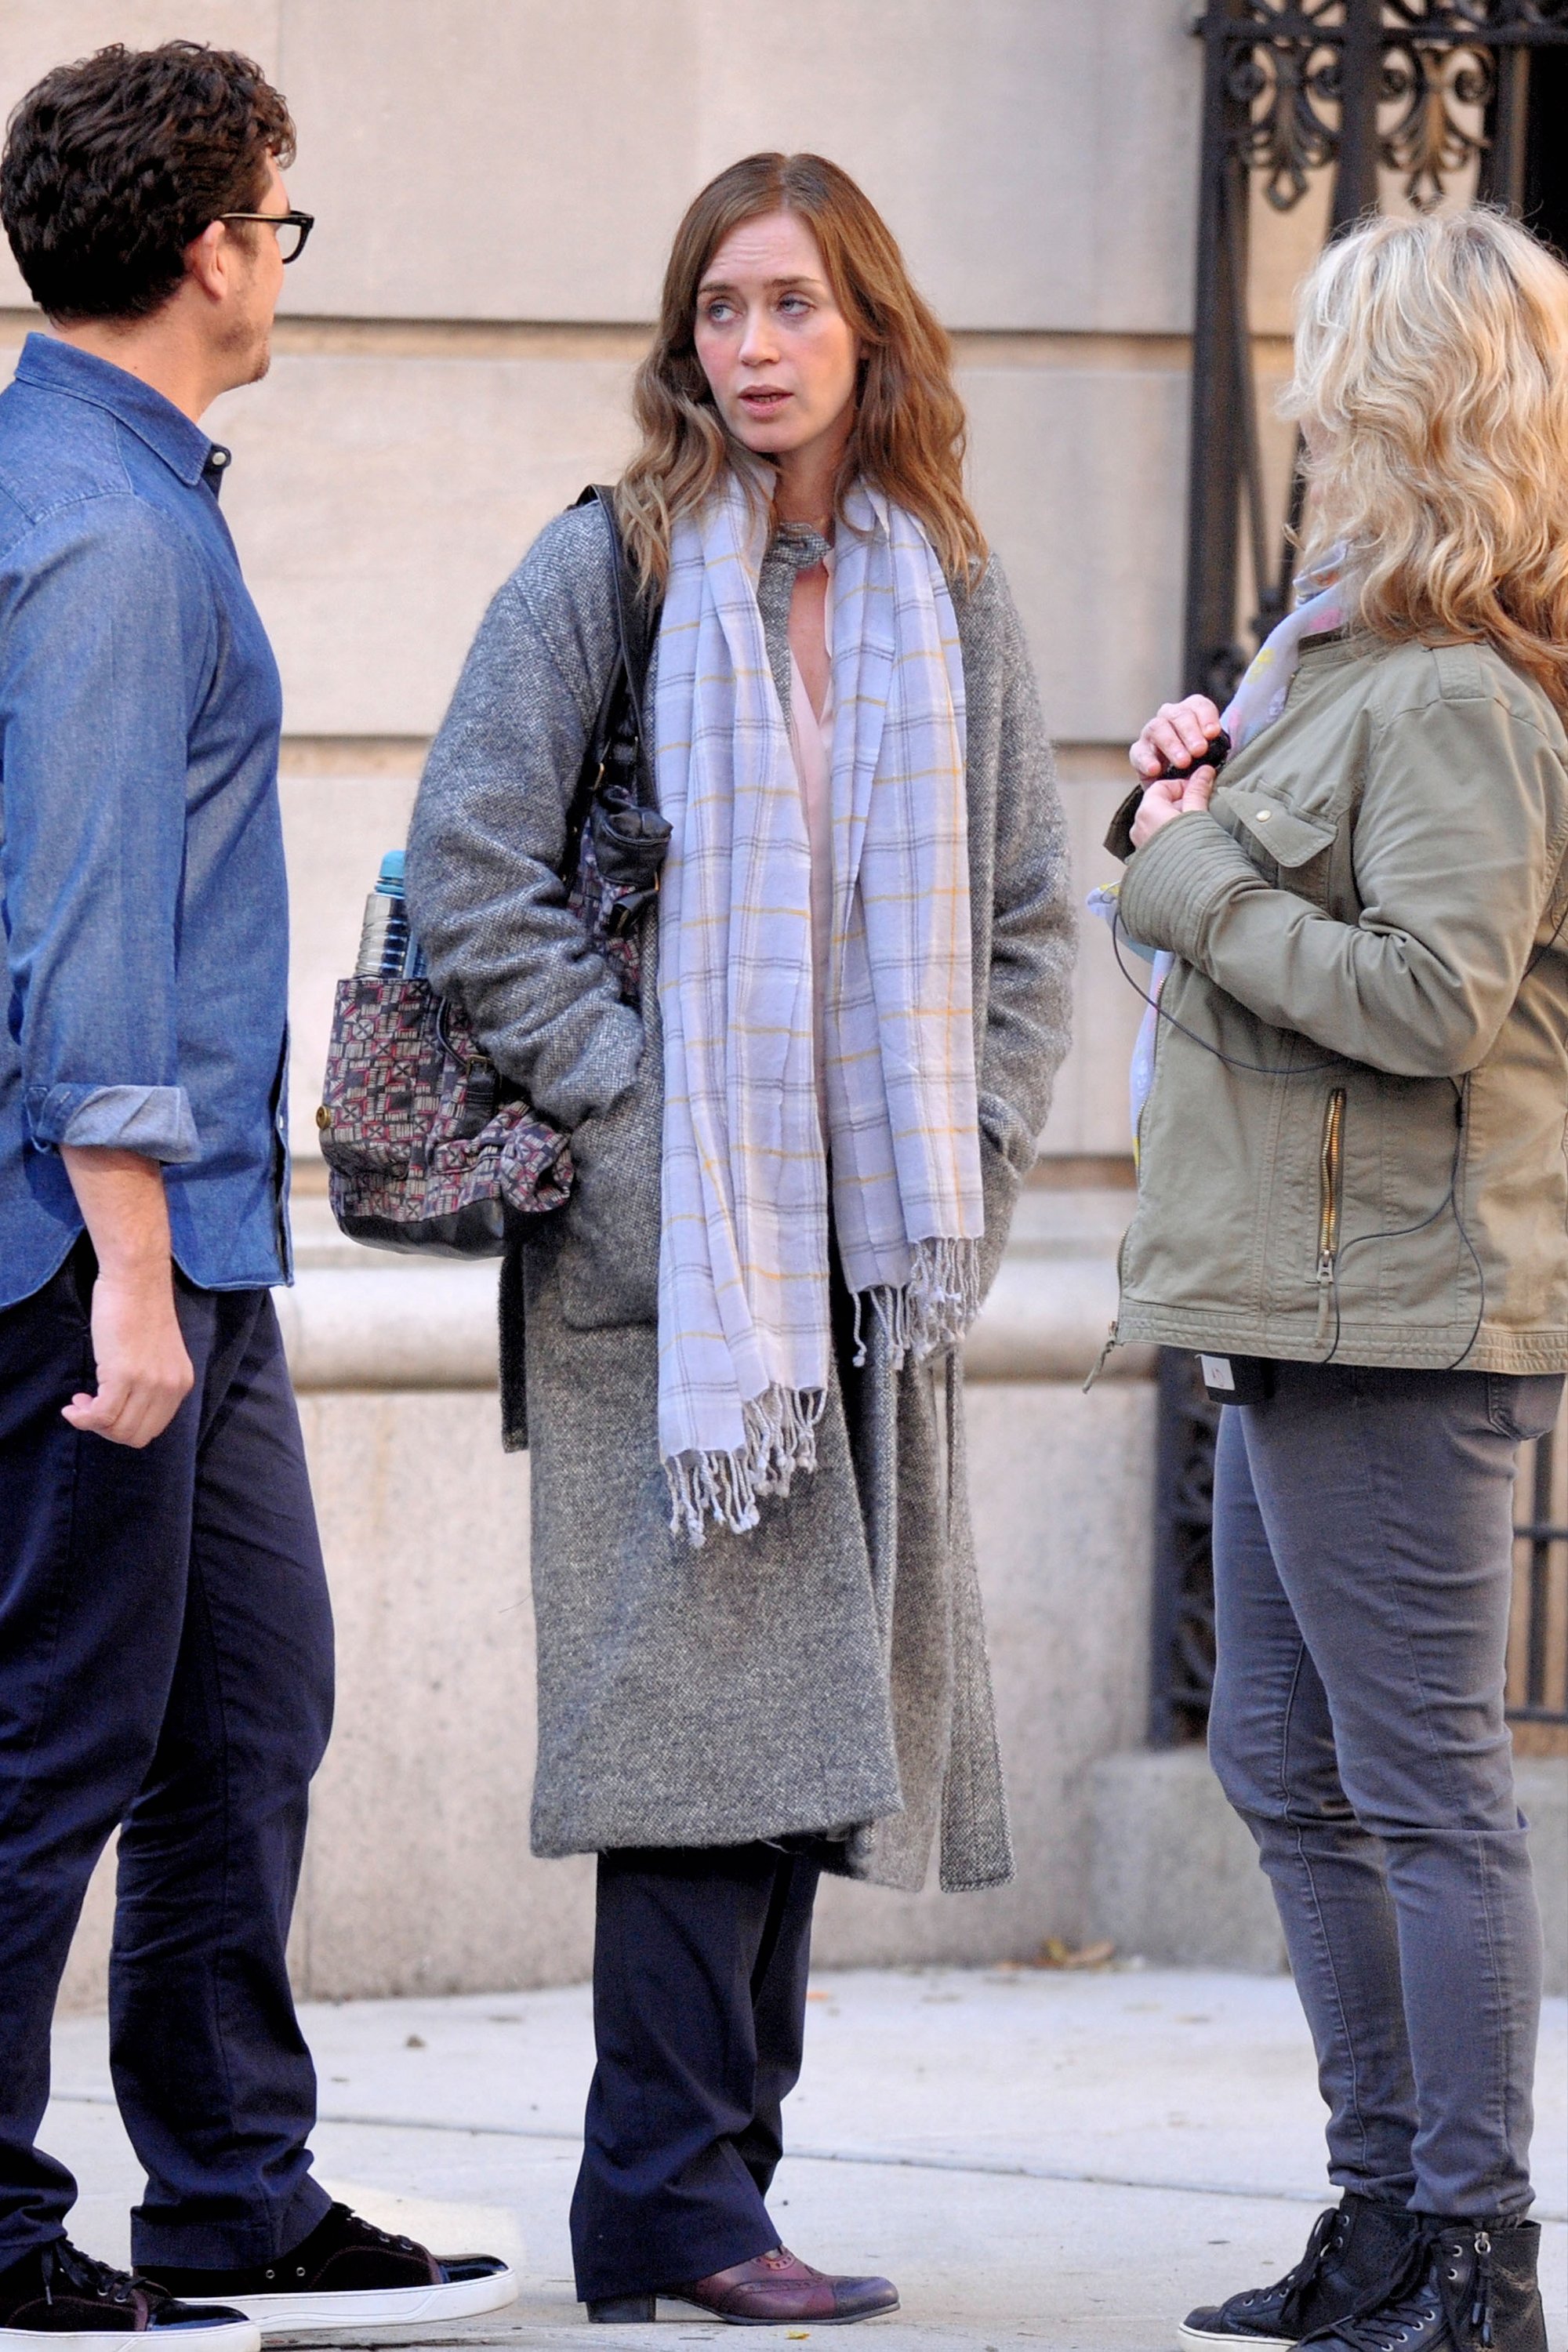 emily-blunt-the-girl-on-the-train-on-set-009.jpg